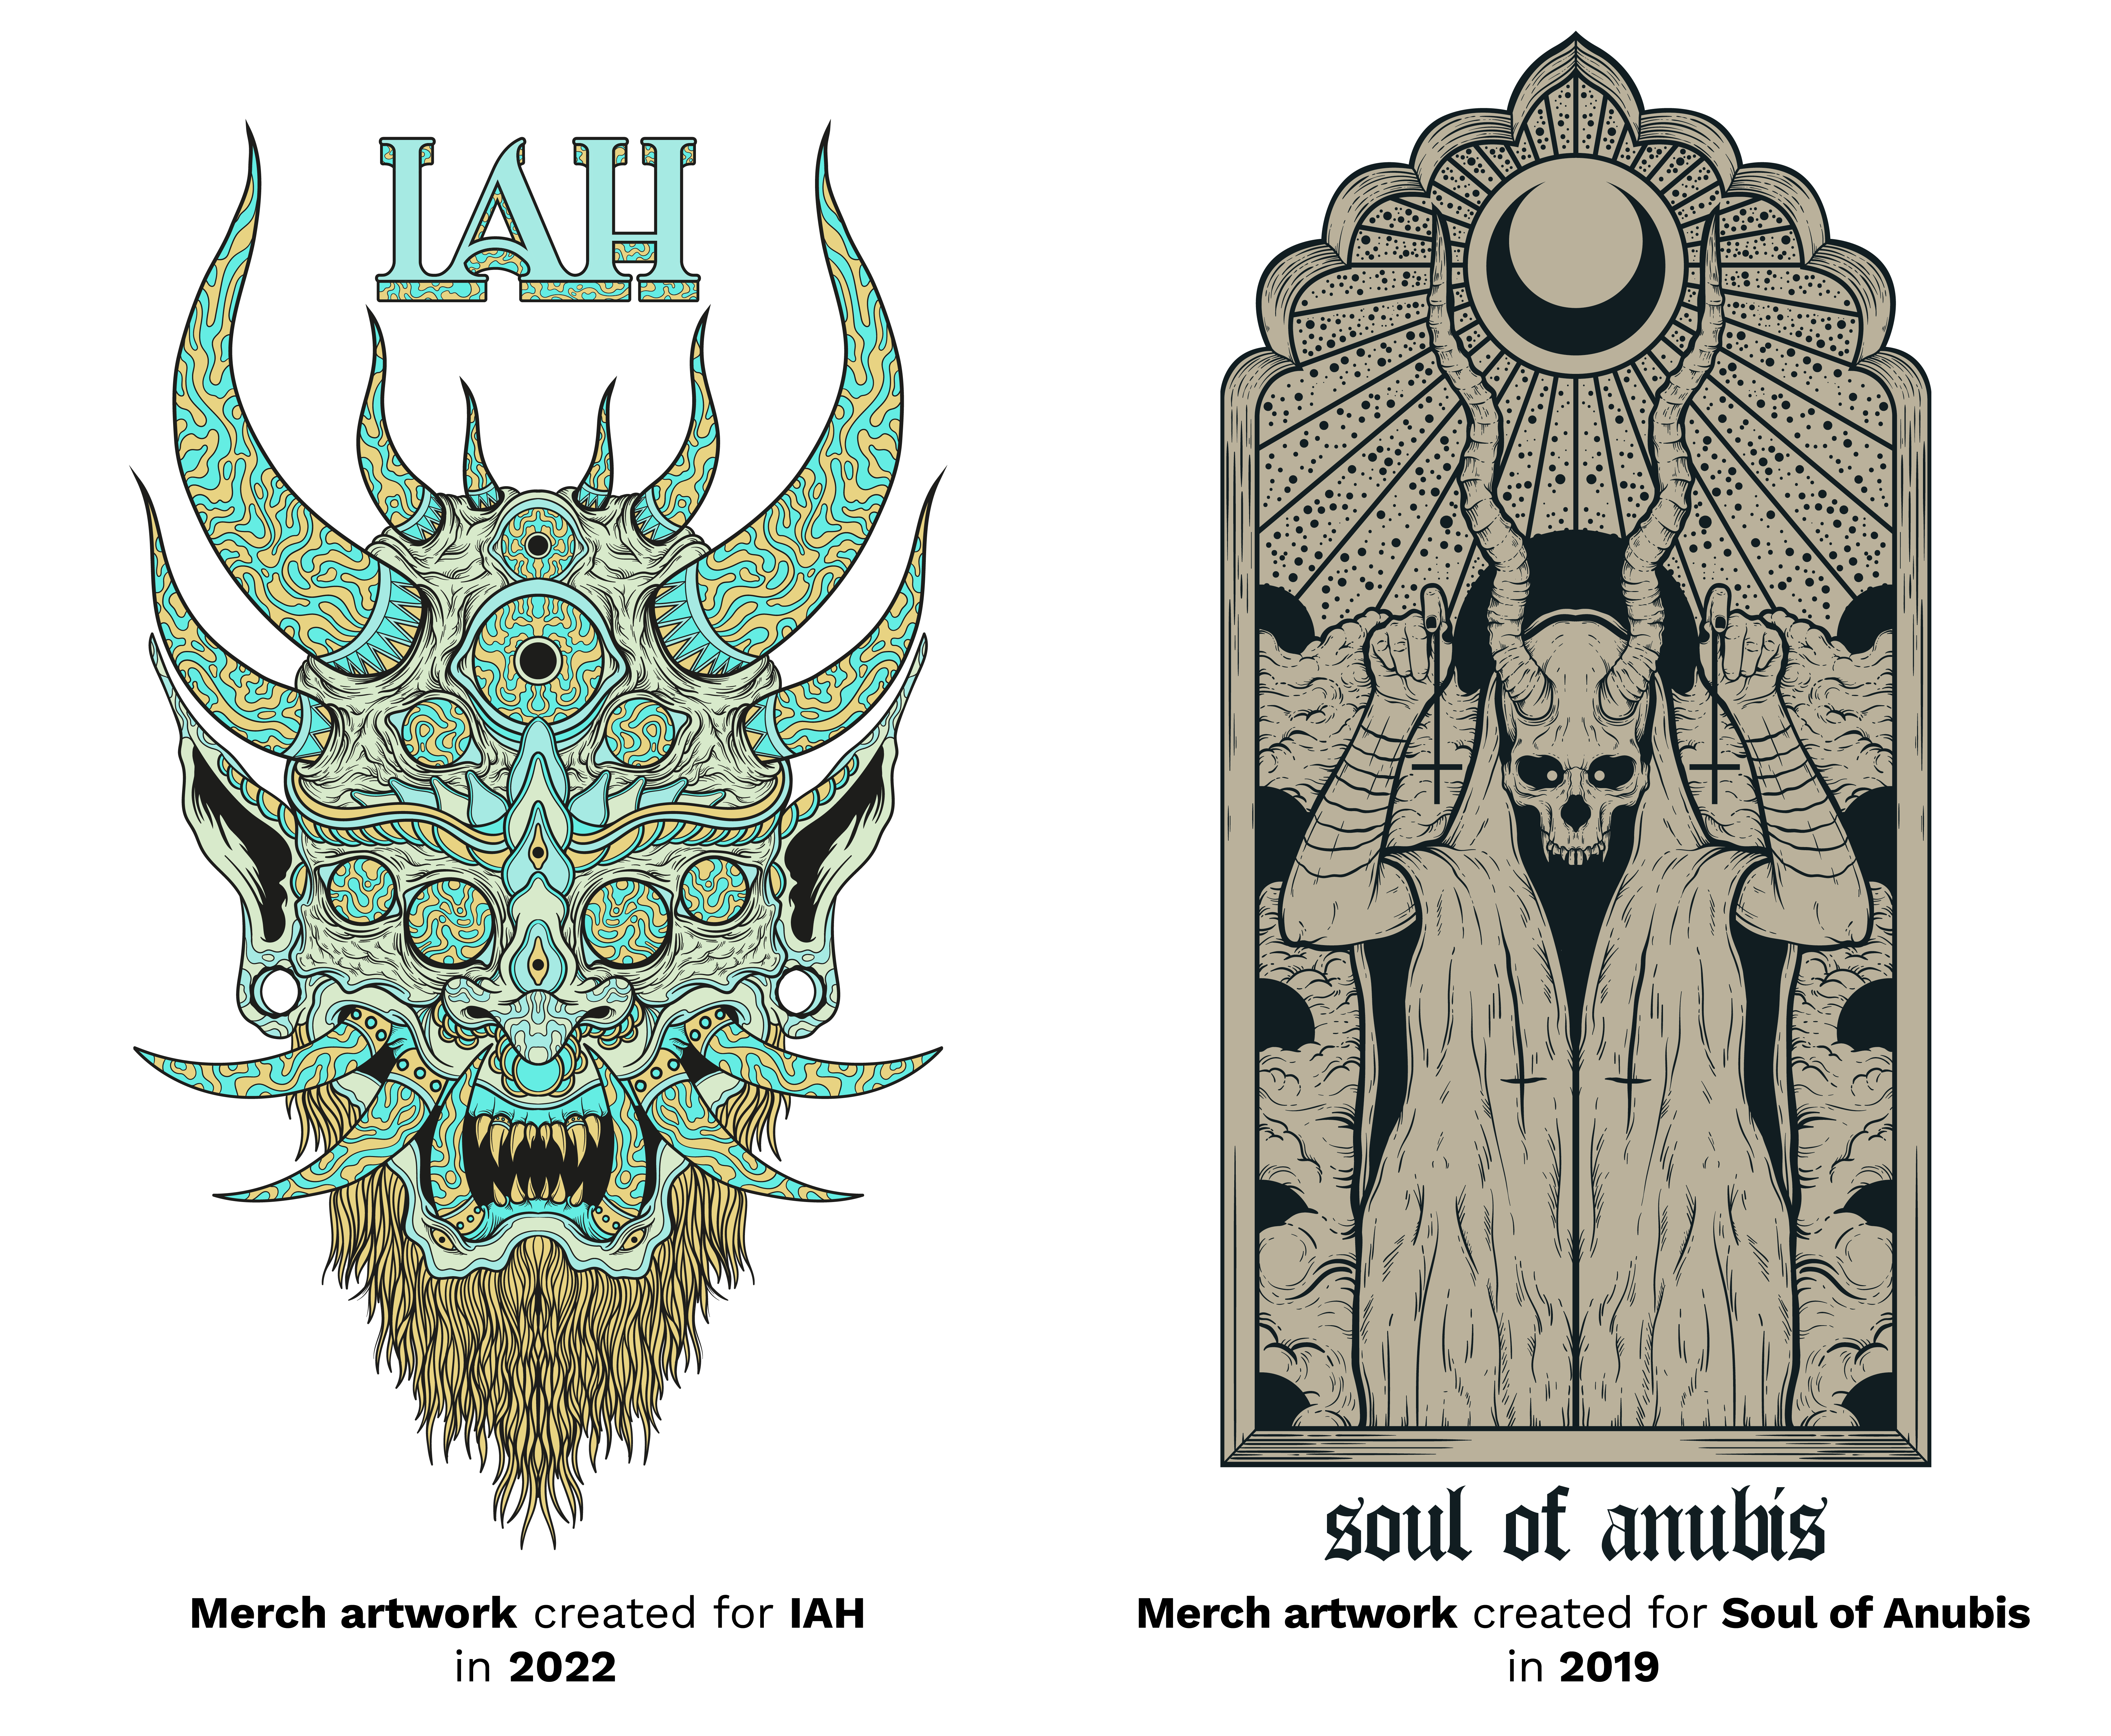 merch artwork for IAH and merch artwork for soul of anubis